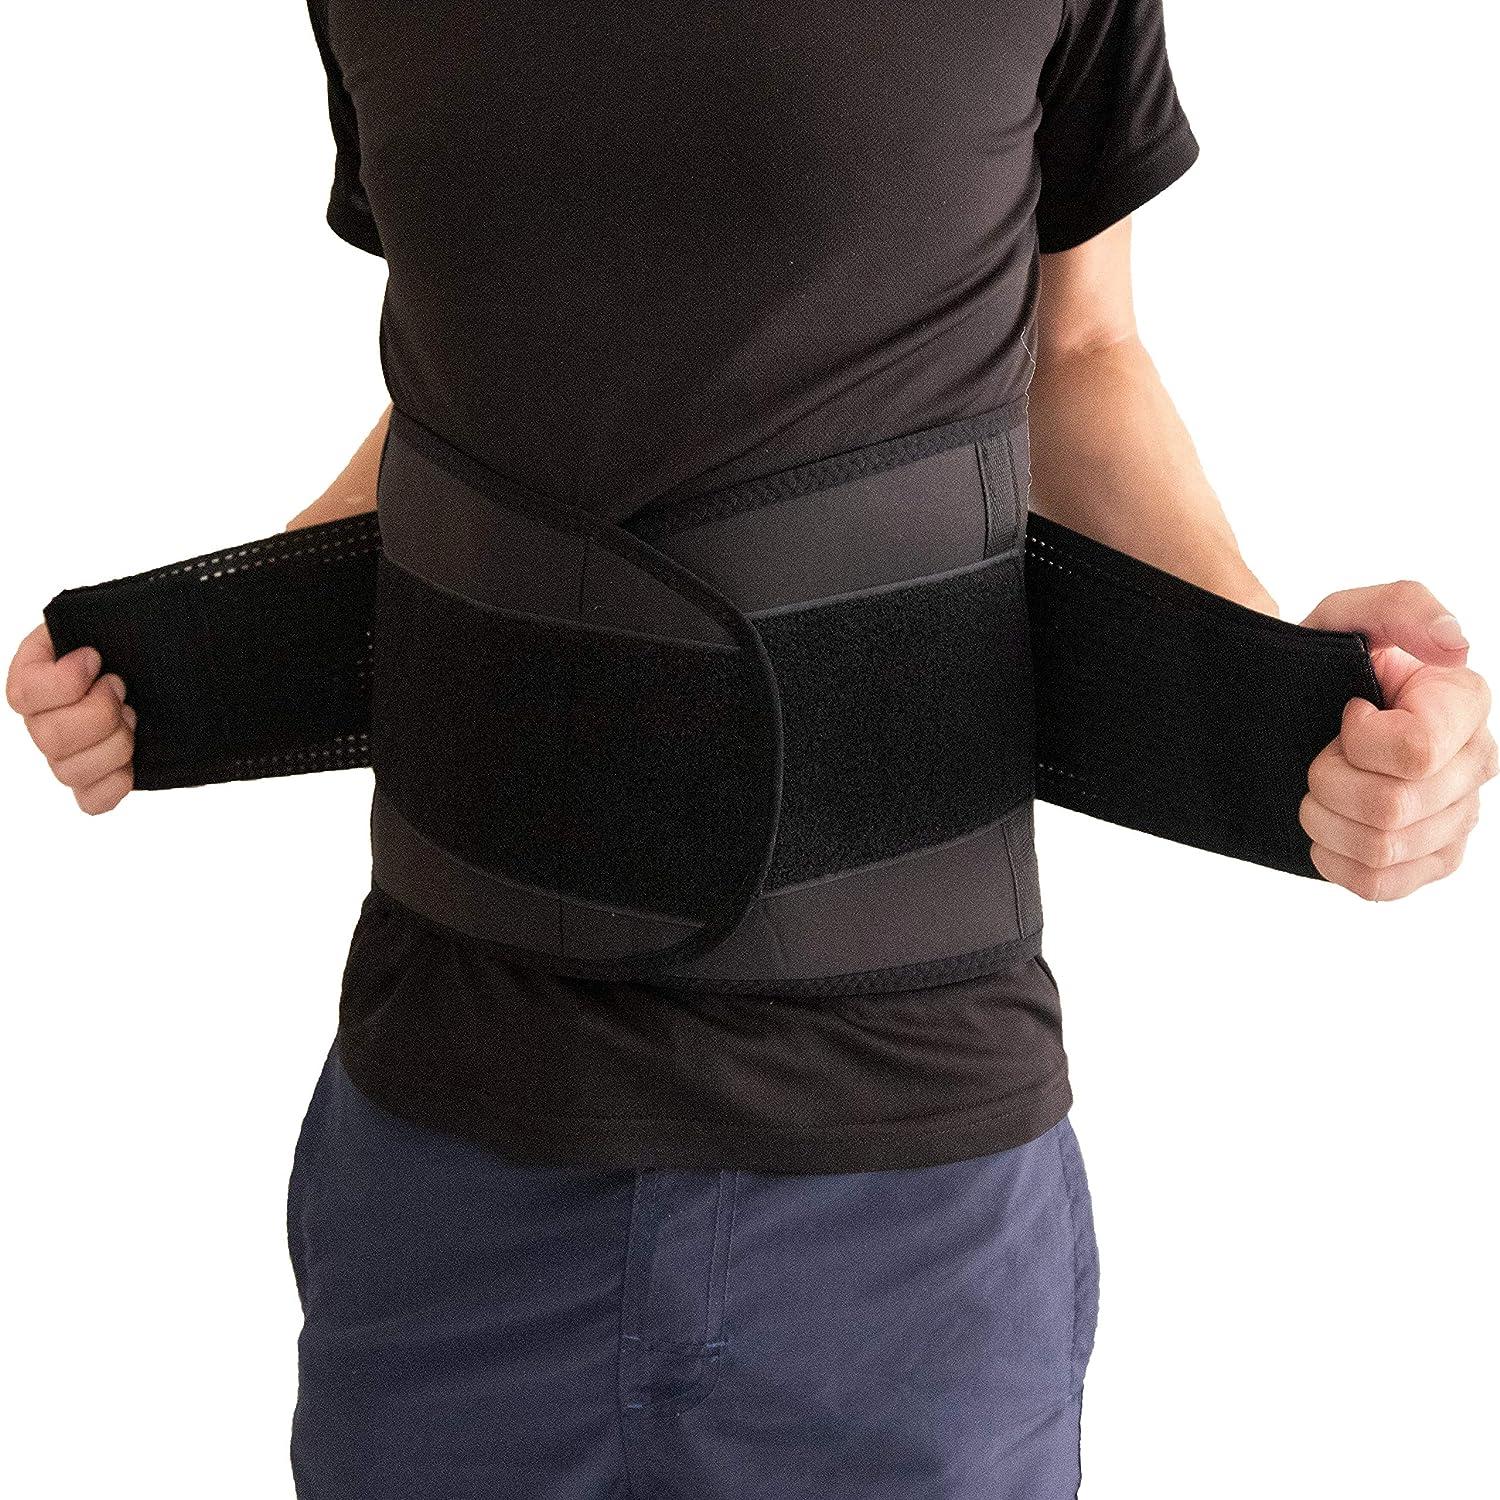 RiptGear Back Brace for Back Pain Relief and Support for Lower